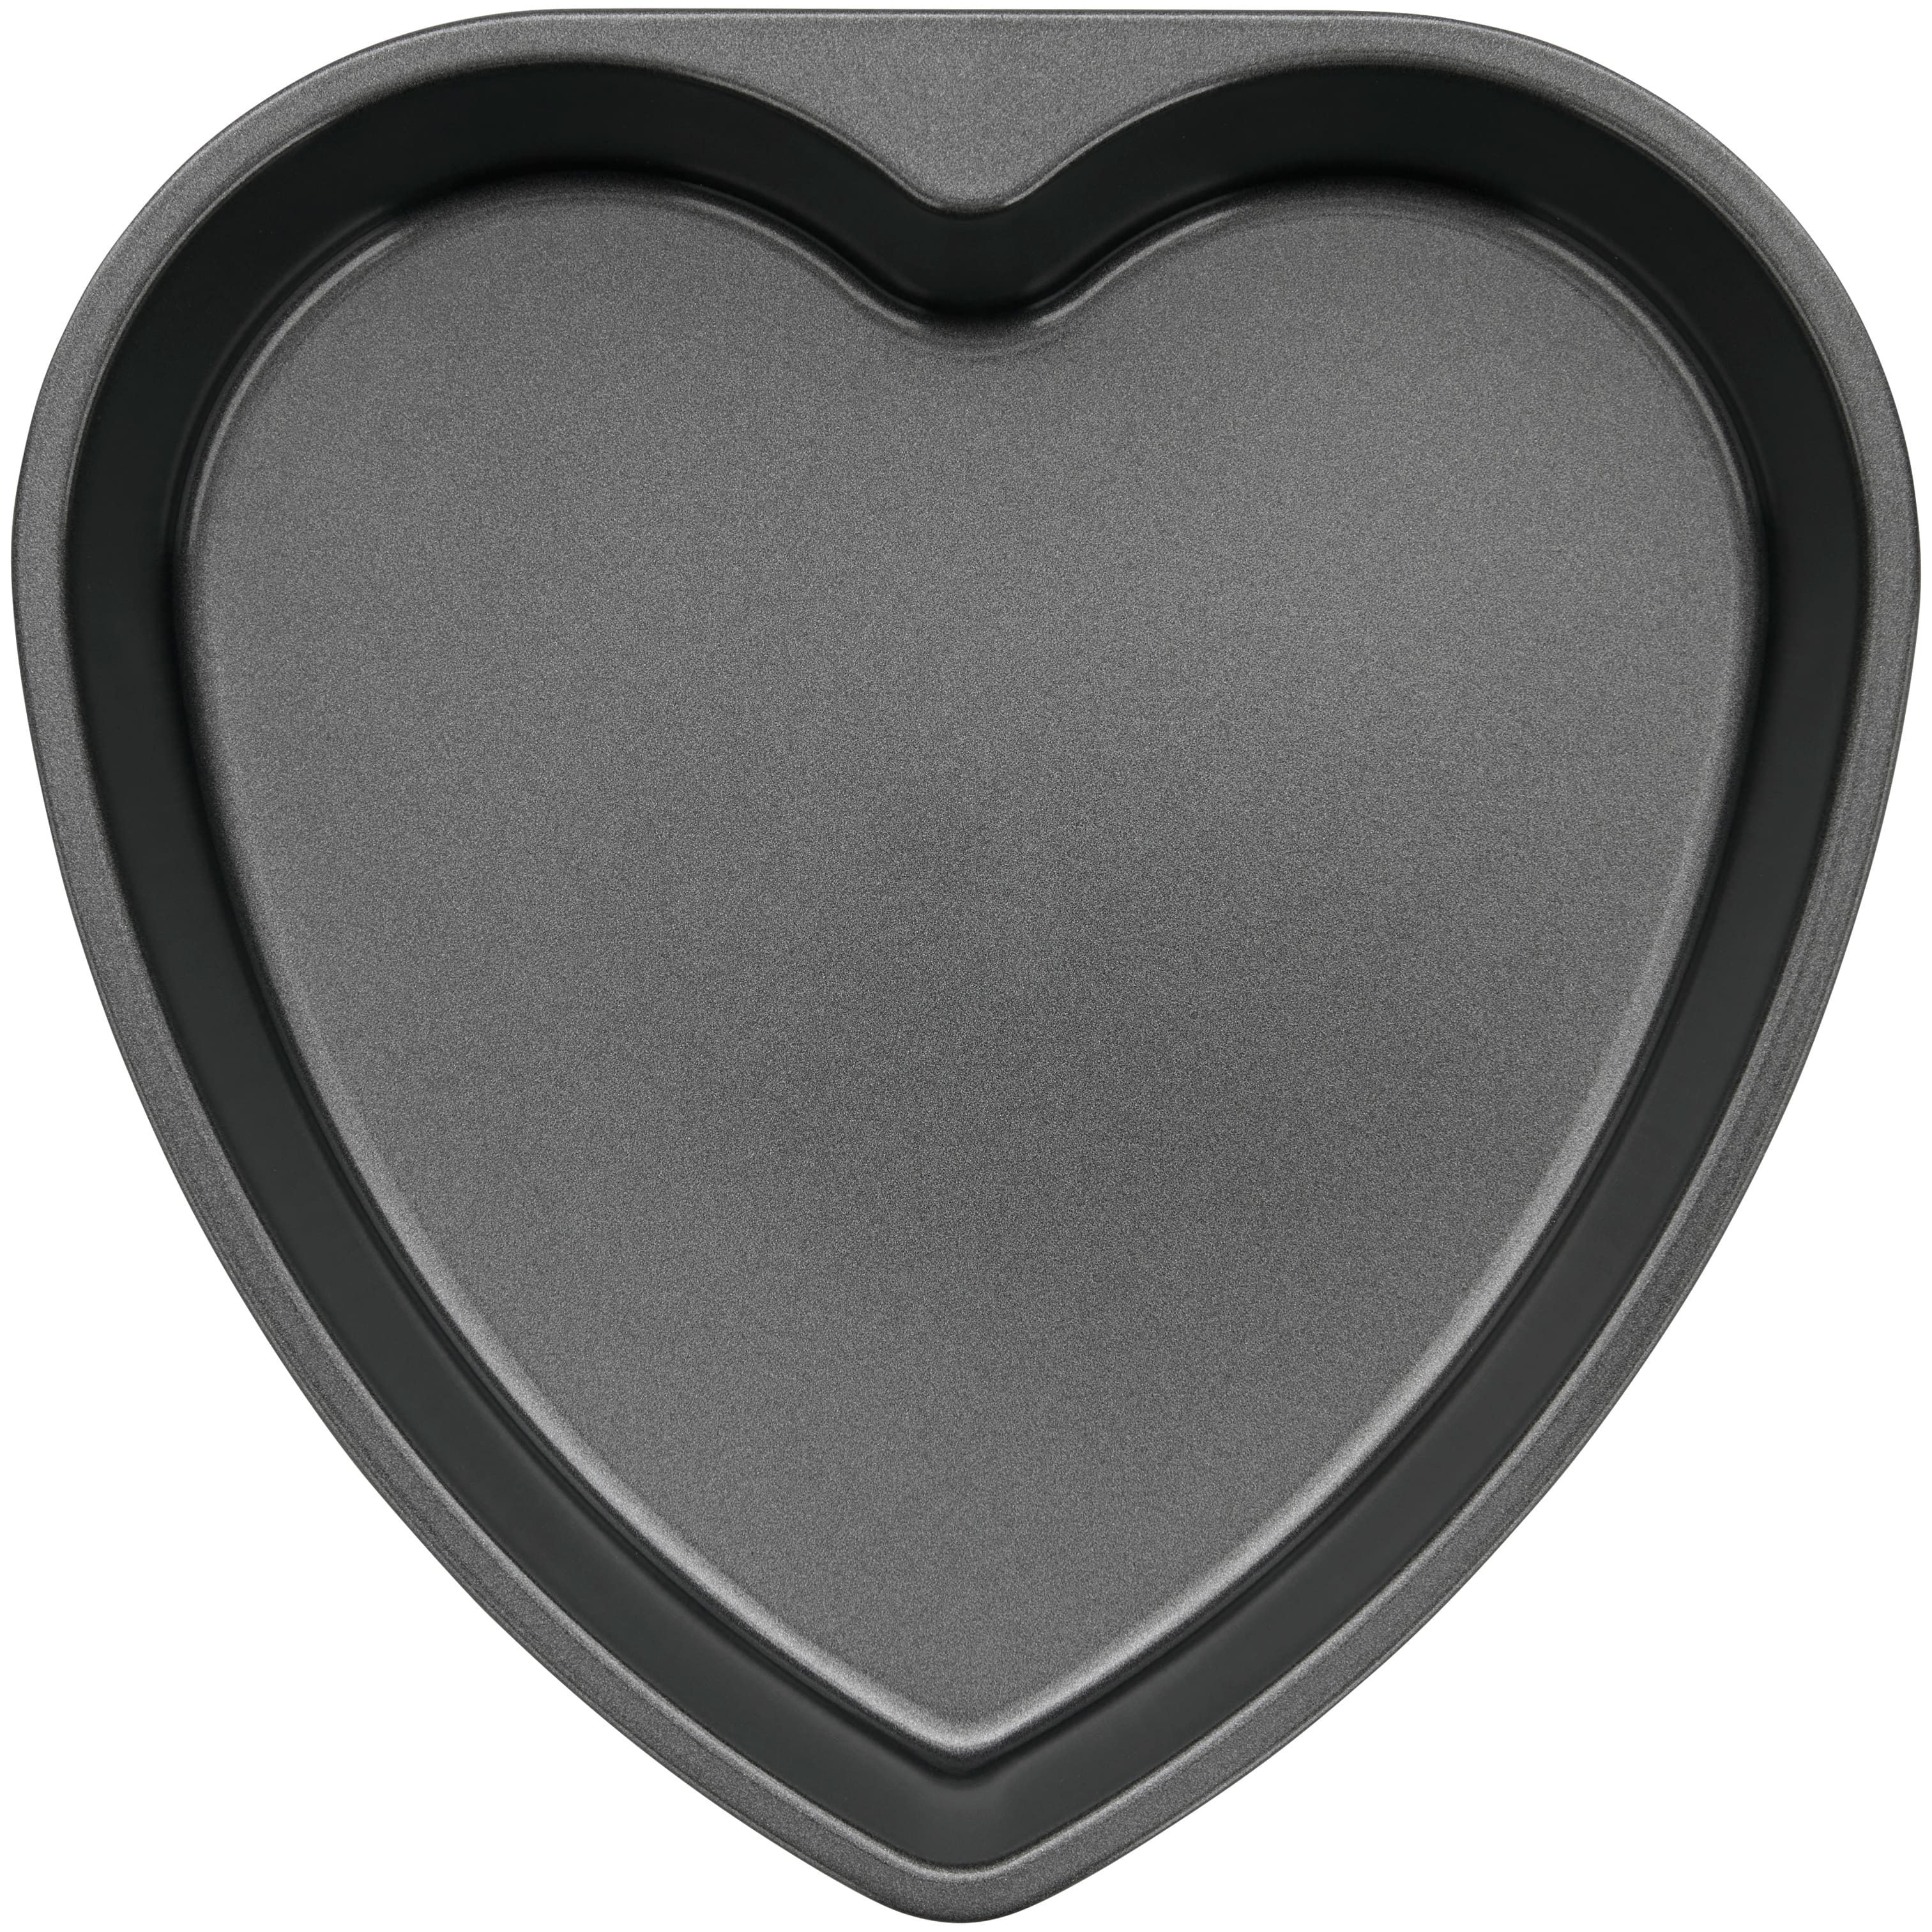 Heart Shaped Cake Pans for sale